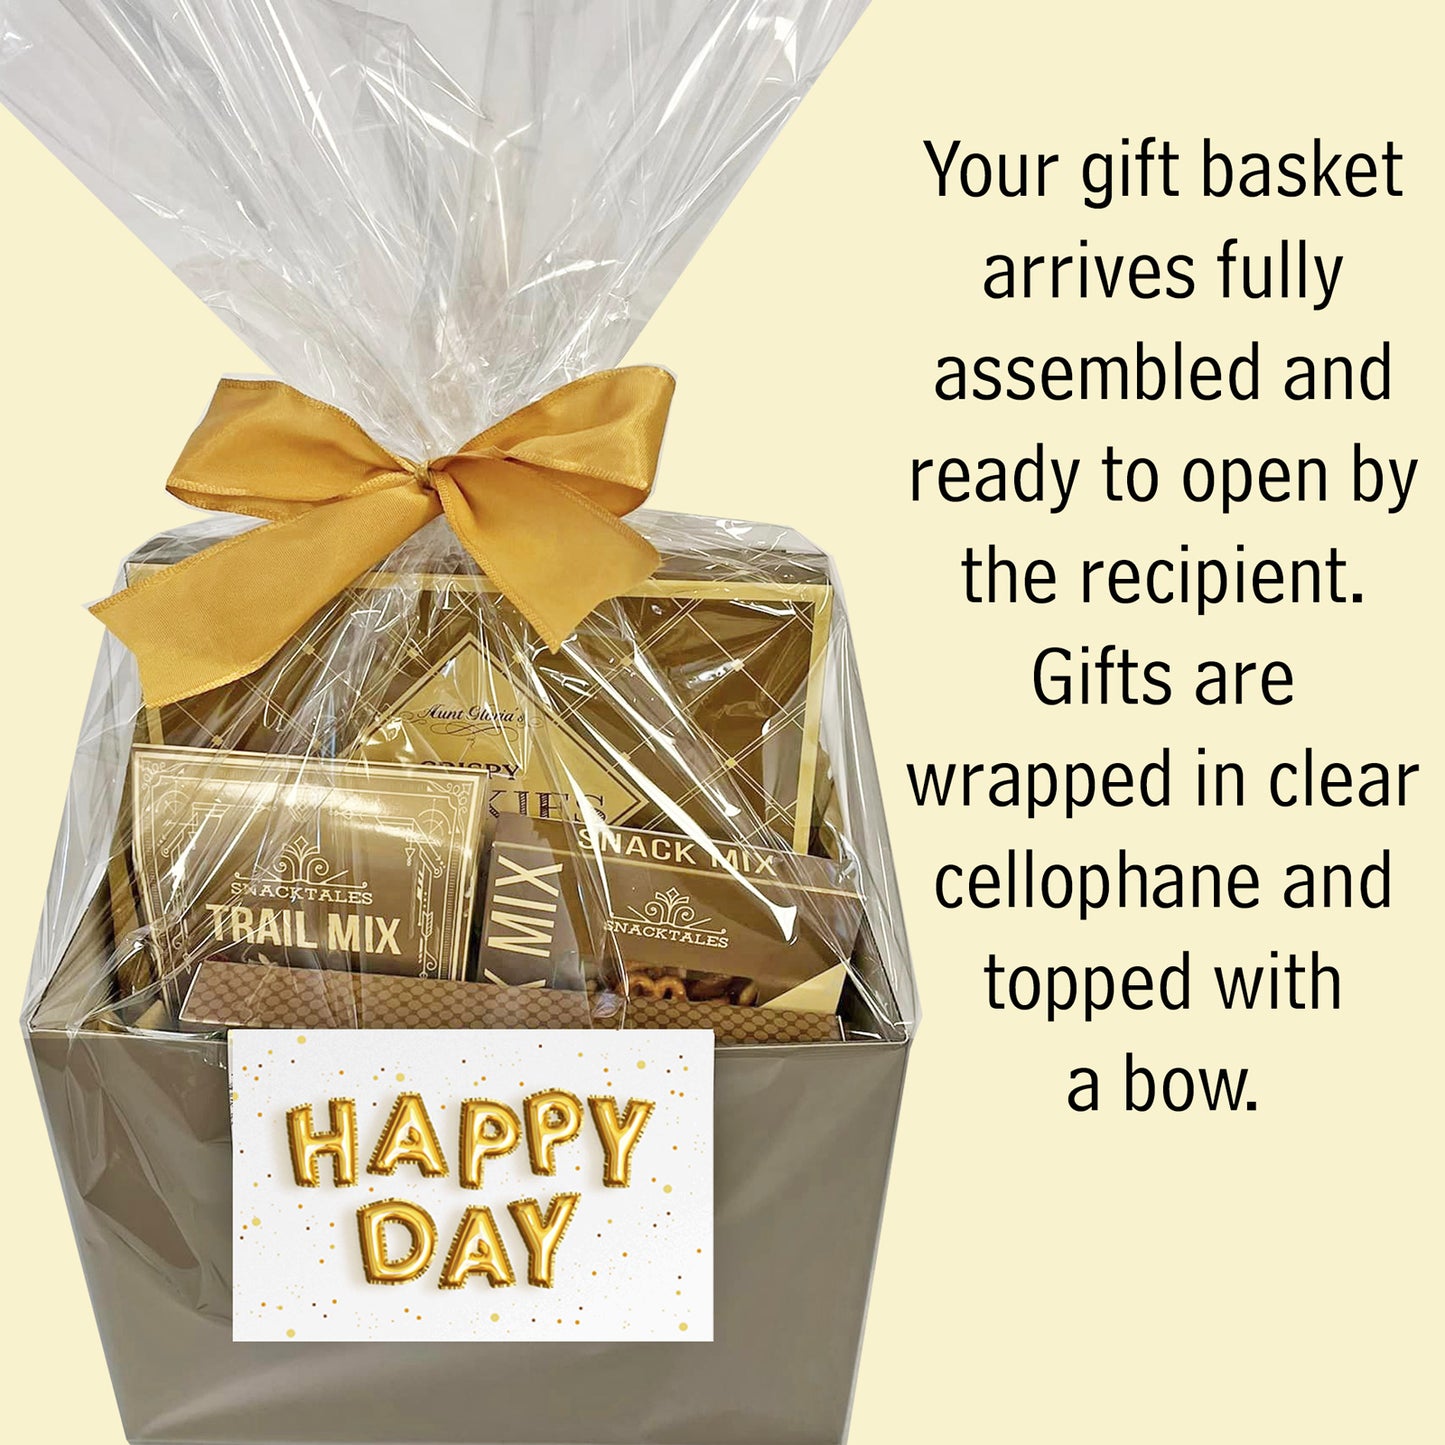 Fabulous Birthday Gift Box for Men, Women, Students, Military, Friends and Family a Snack Filled Birthday Gift Basket for Her and for Him